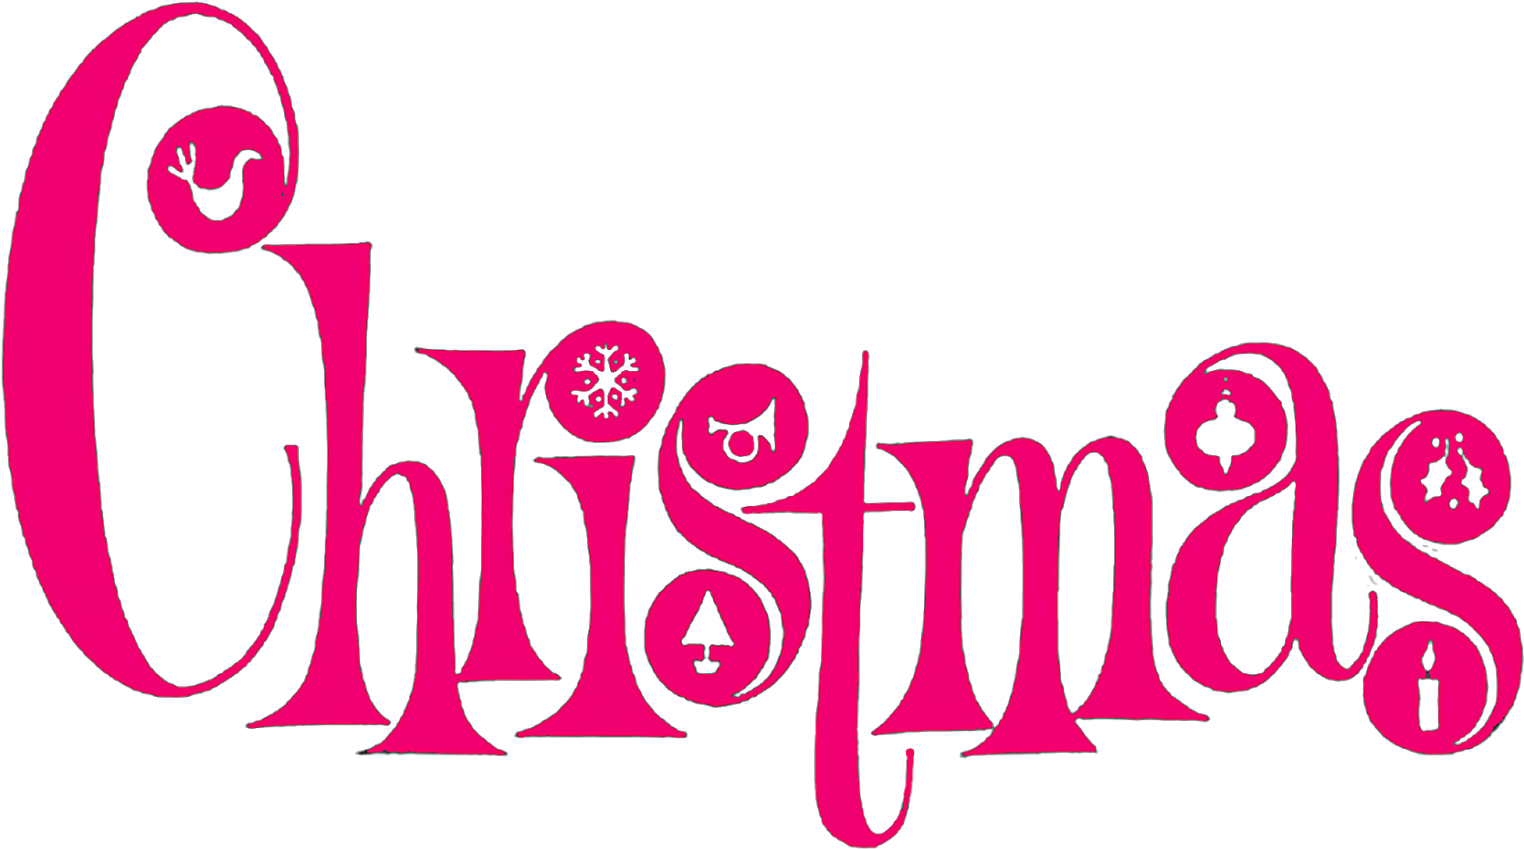 Festive Christmas Text Clipart PNG